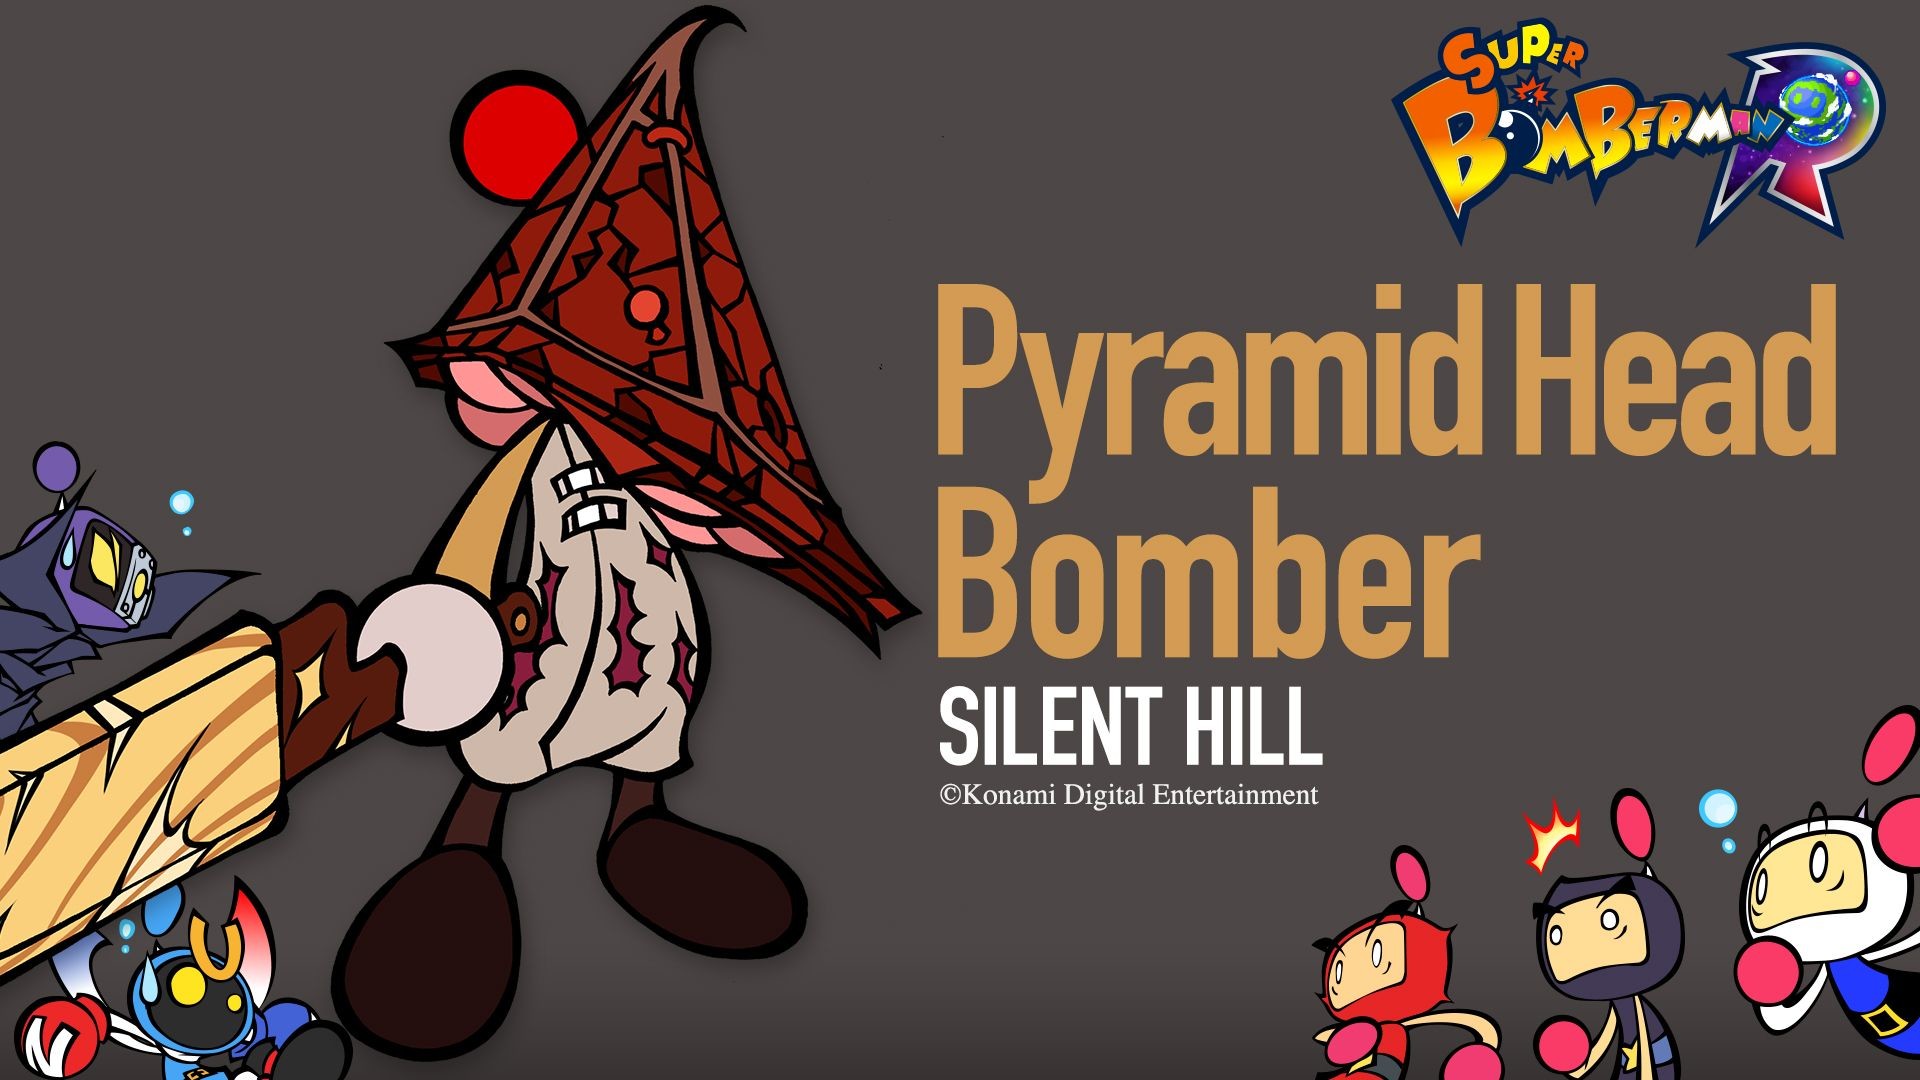 1920x1080 Super Bomberman R gets Silent Hill crossover